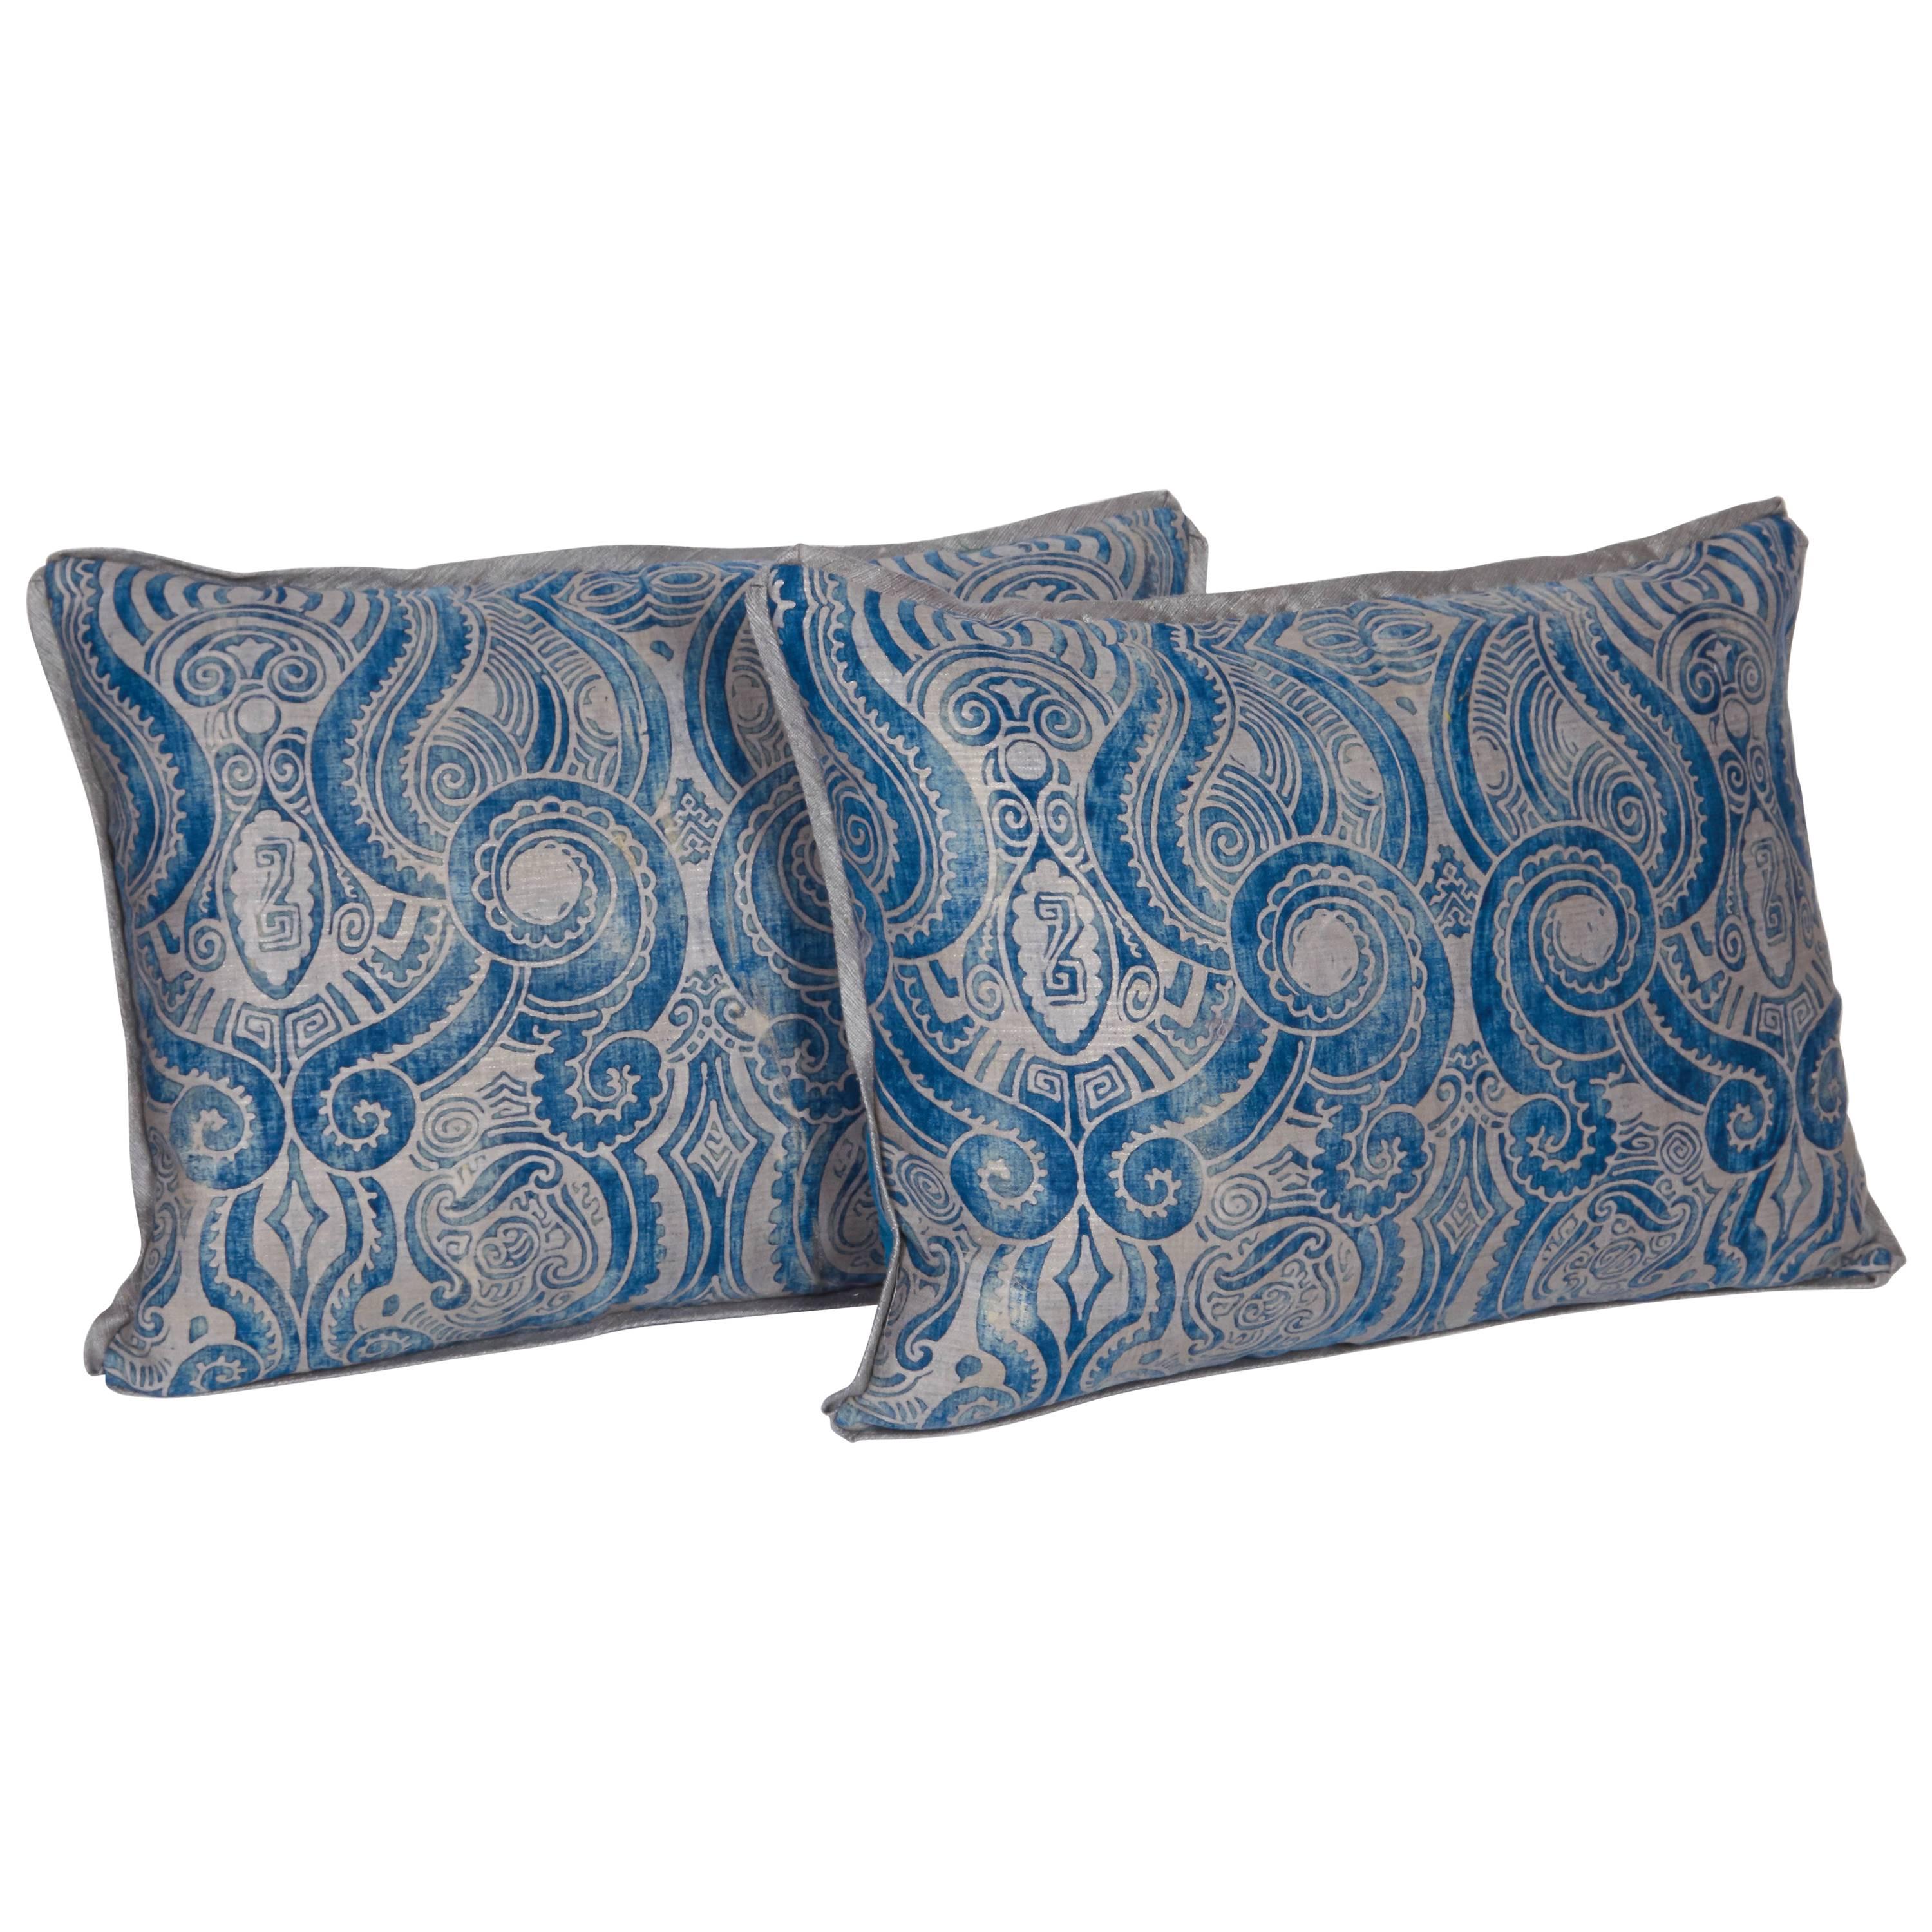 A Pair of Fortuny Fabric Lumbar Cushions in the Peruviano Pattern